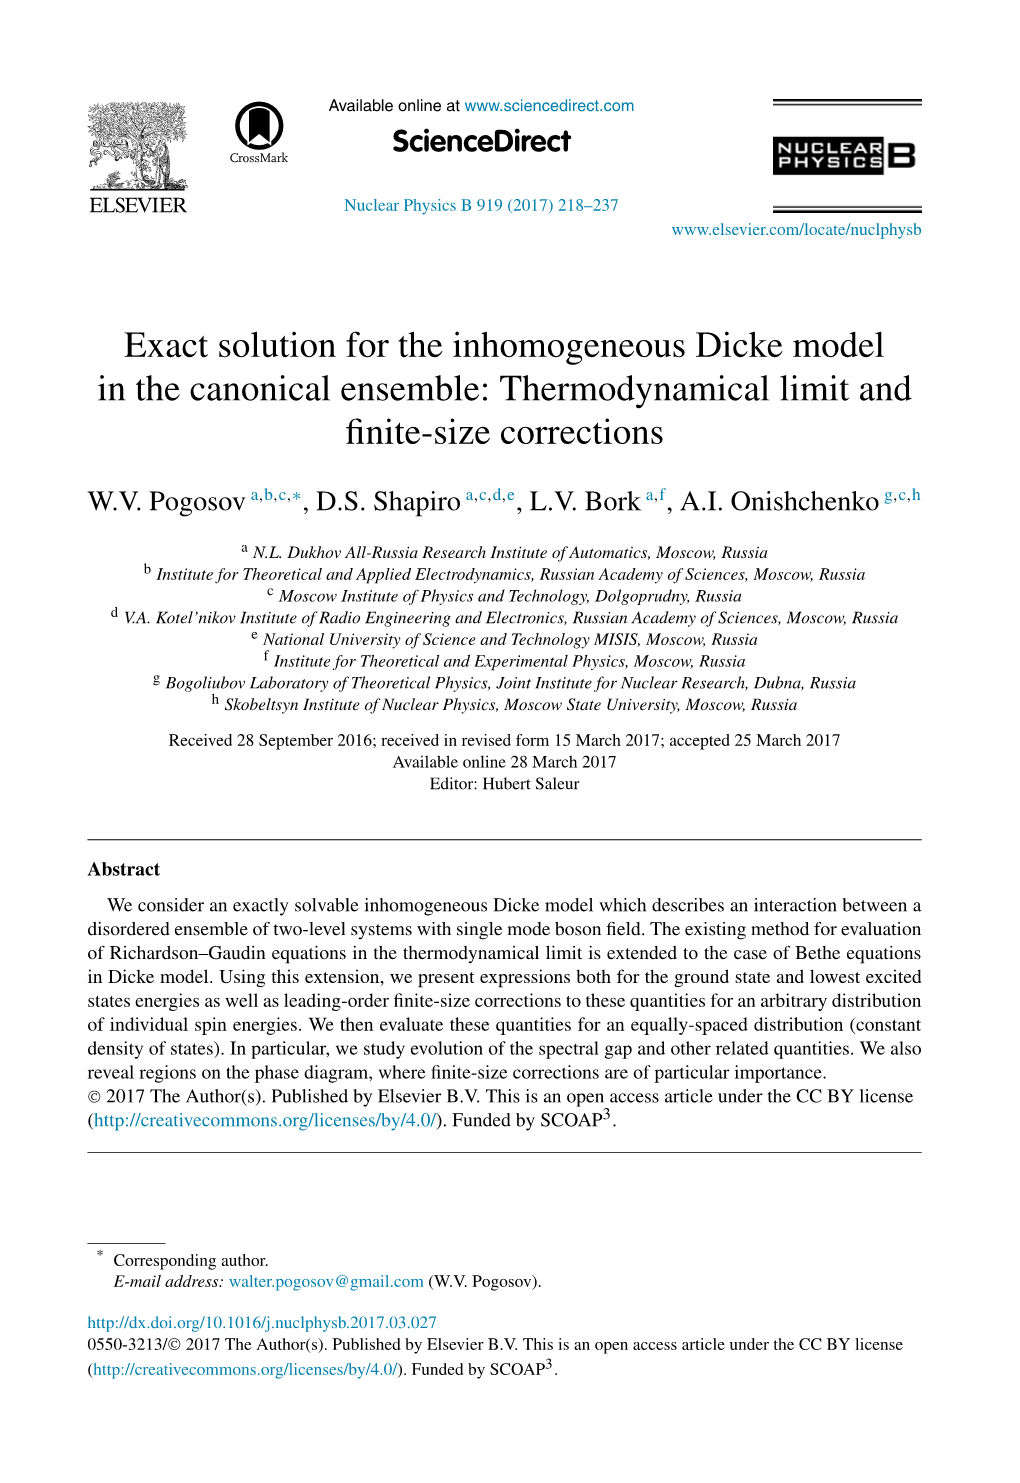 Exact Solution for the Inhomogeneous Dicke Model in the Canonical Ensemble: Thermodynamical Limit and ﬁnite-Size Corrections